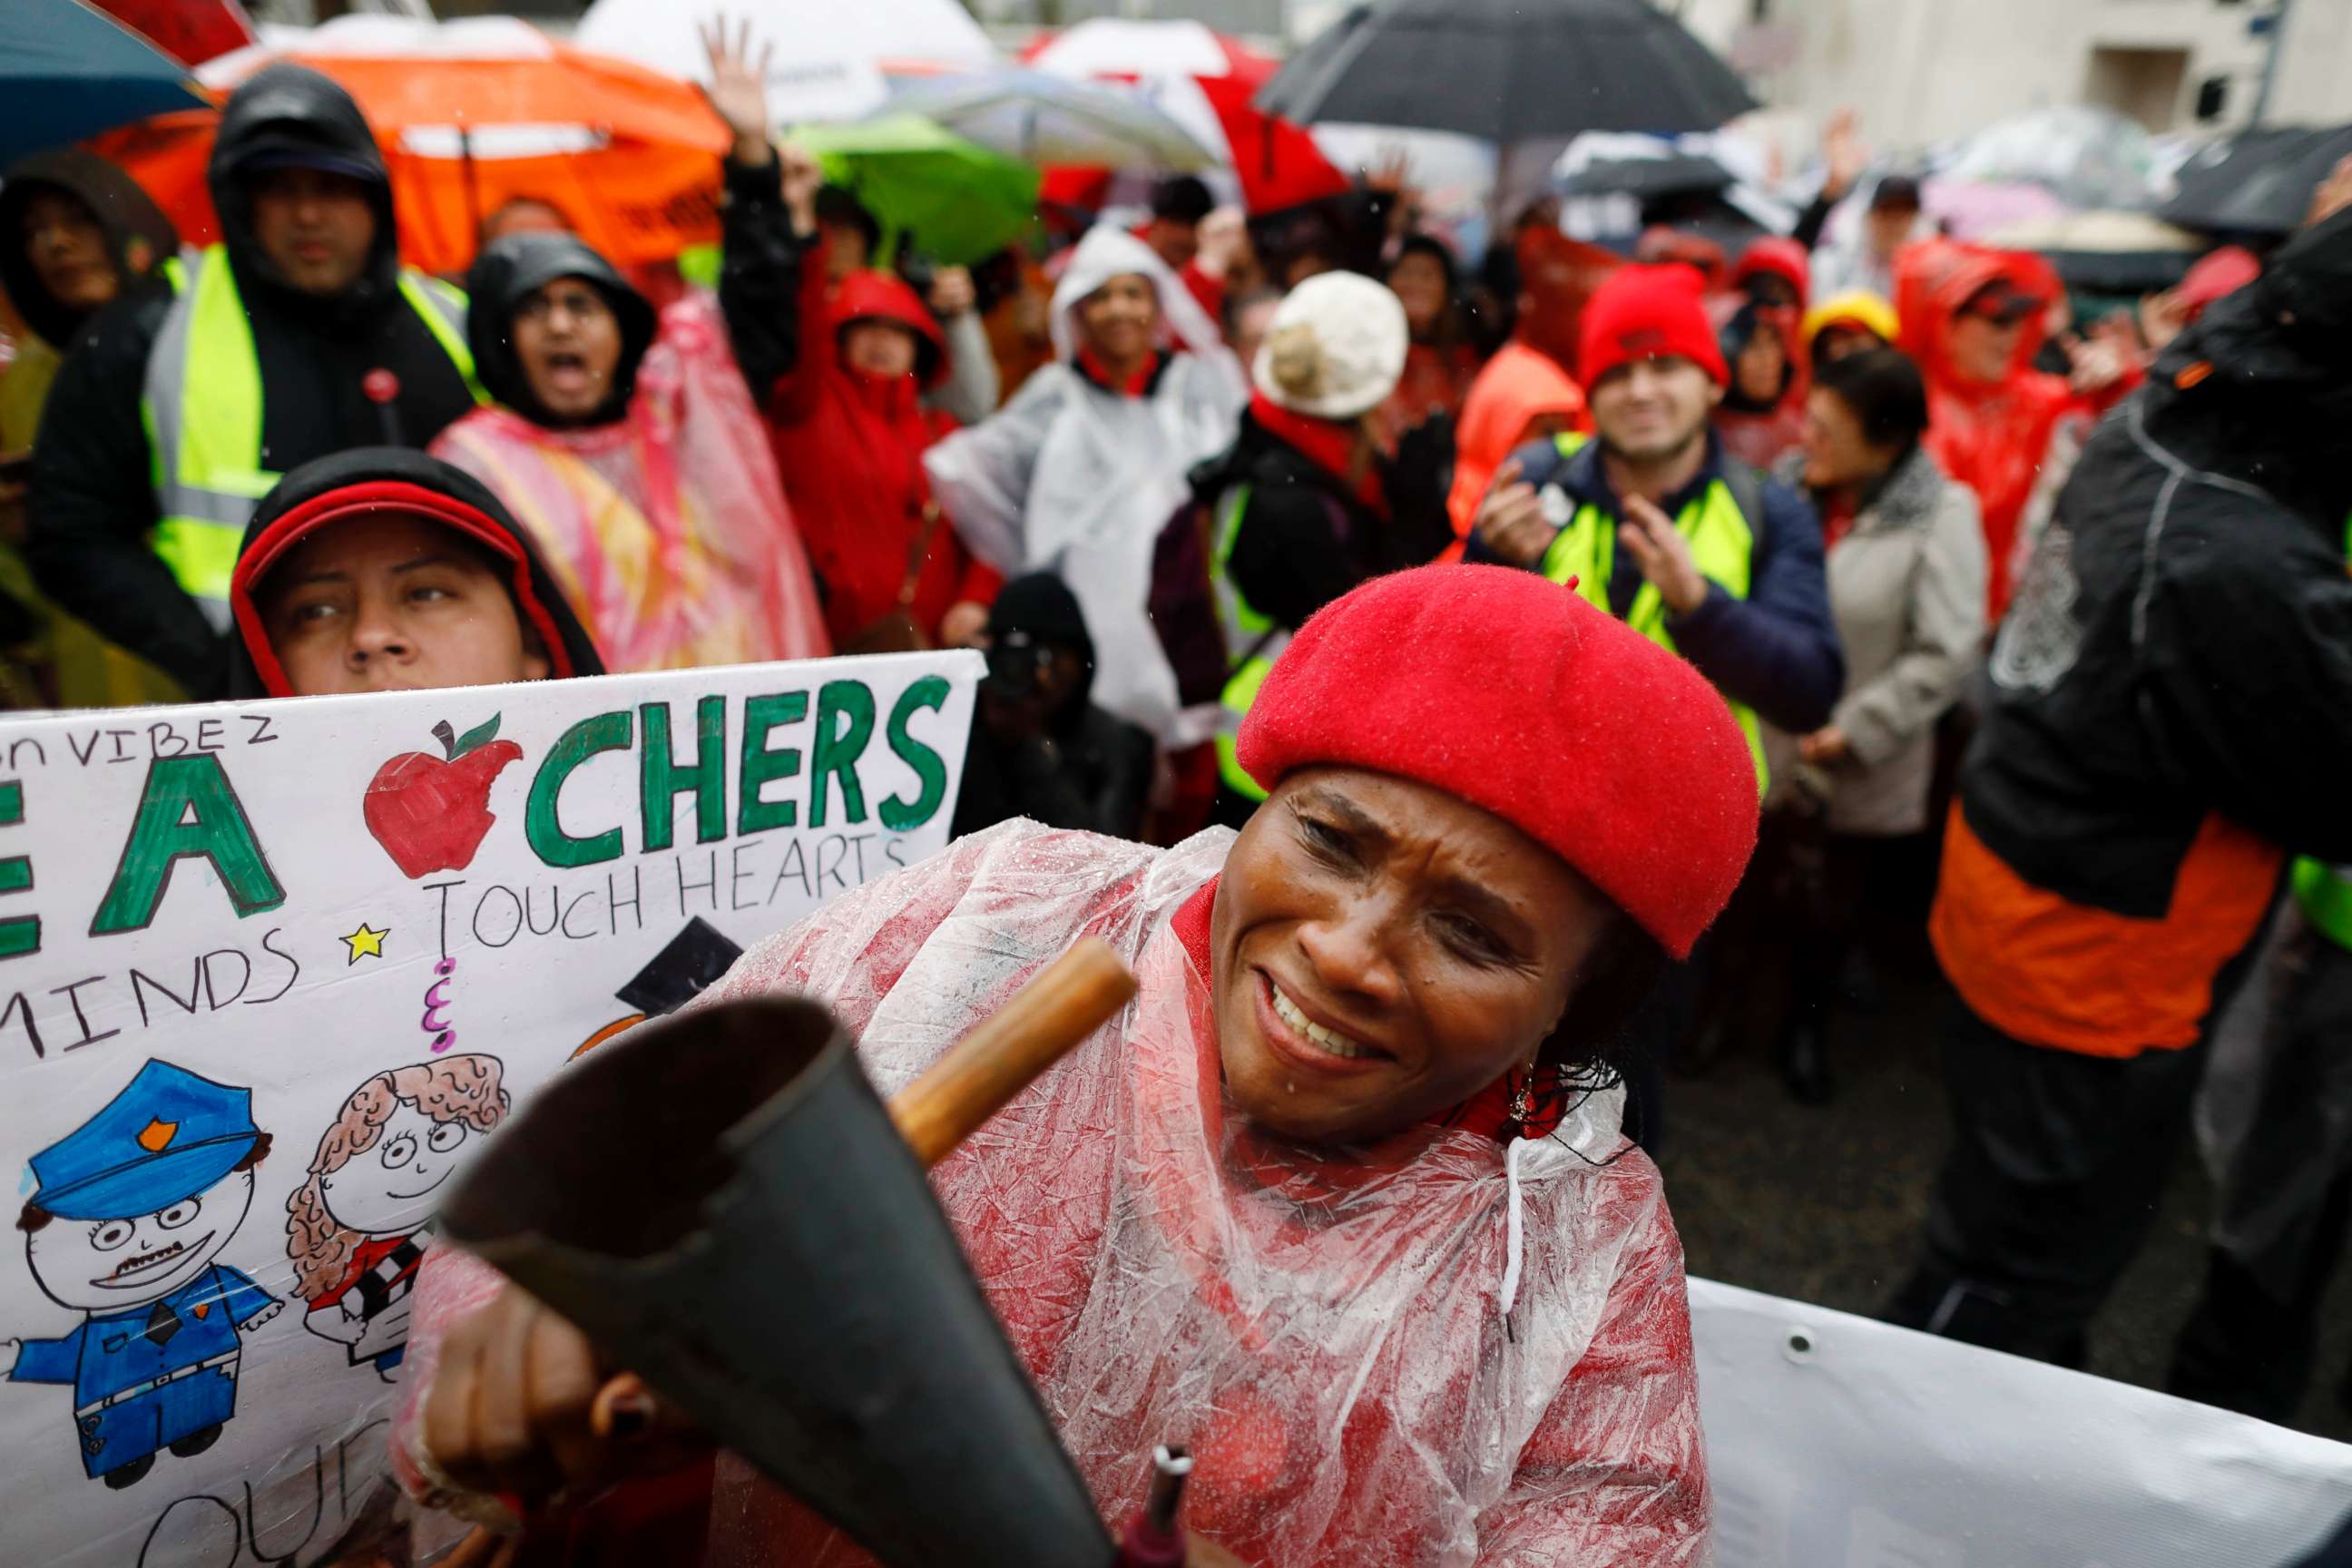 PHOTO: Teacher Nkechi Apakama along with Los Angeles Unified School District teachers and supporters gather at Los Angeles Unified School District headquarters on Jan. 14, 2019.